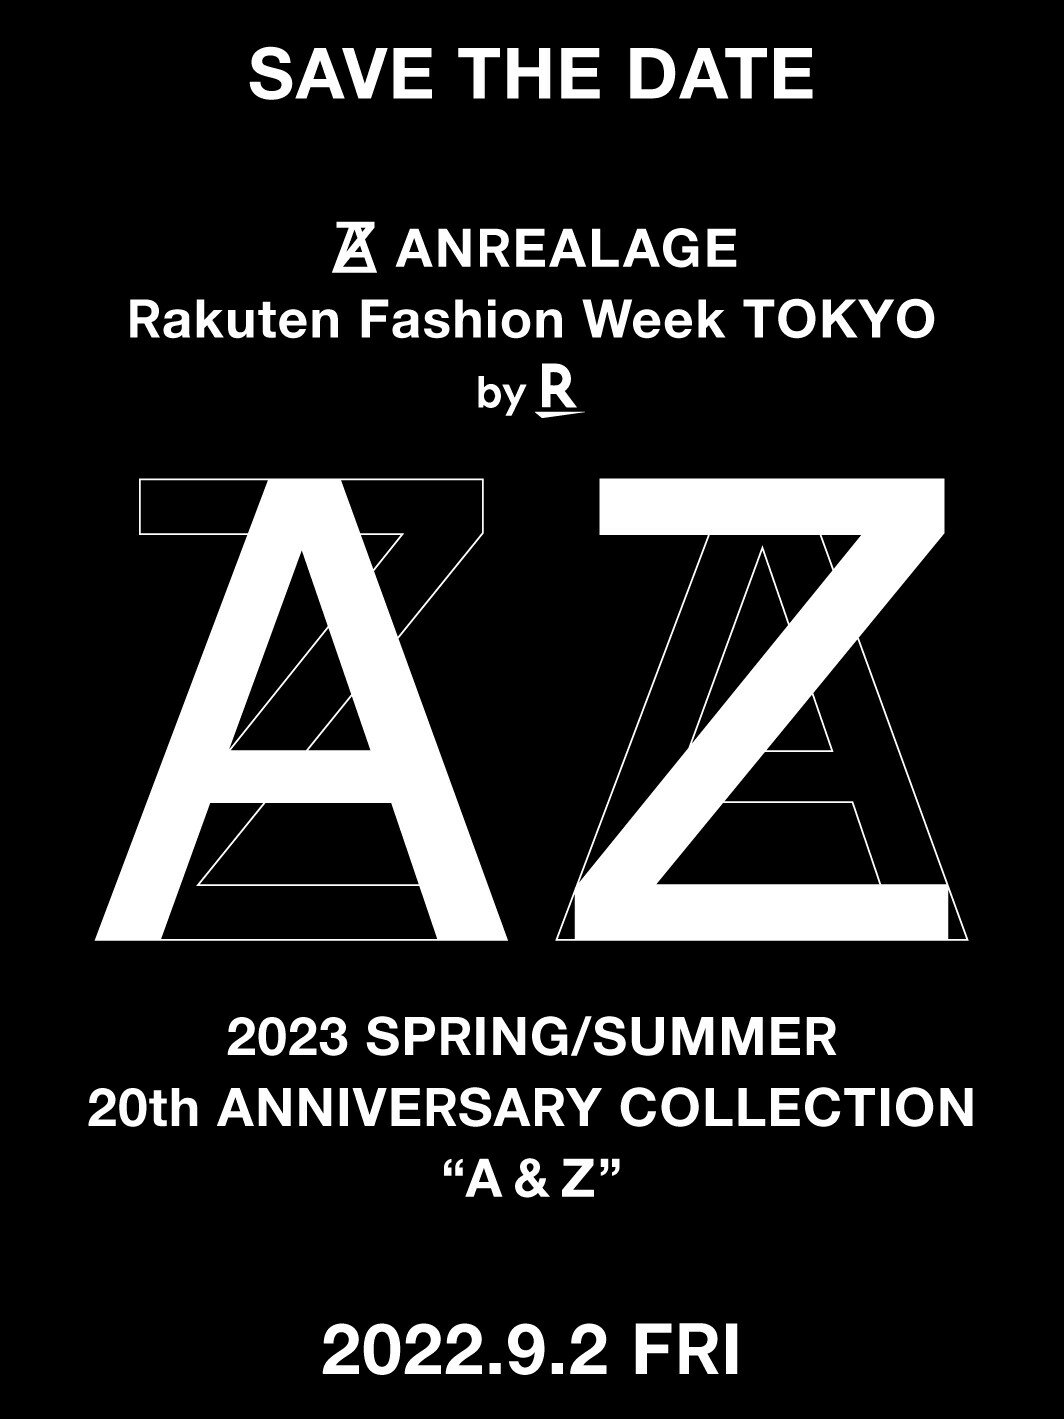 SAVE THE DATE ANREALEAGE Rakuten Fashion Week TOKYO By R 2023 SPRING/SUMMER 20th ANNIVERSARY COLLECTION A&Z 2022.9.2 FRI